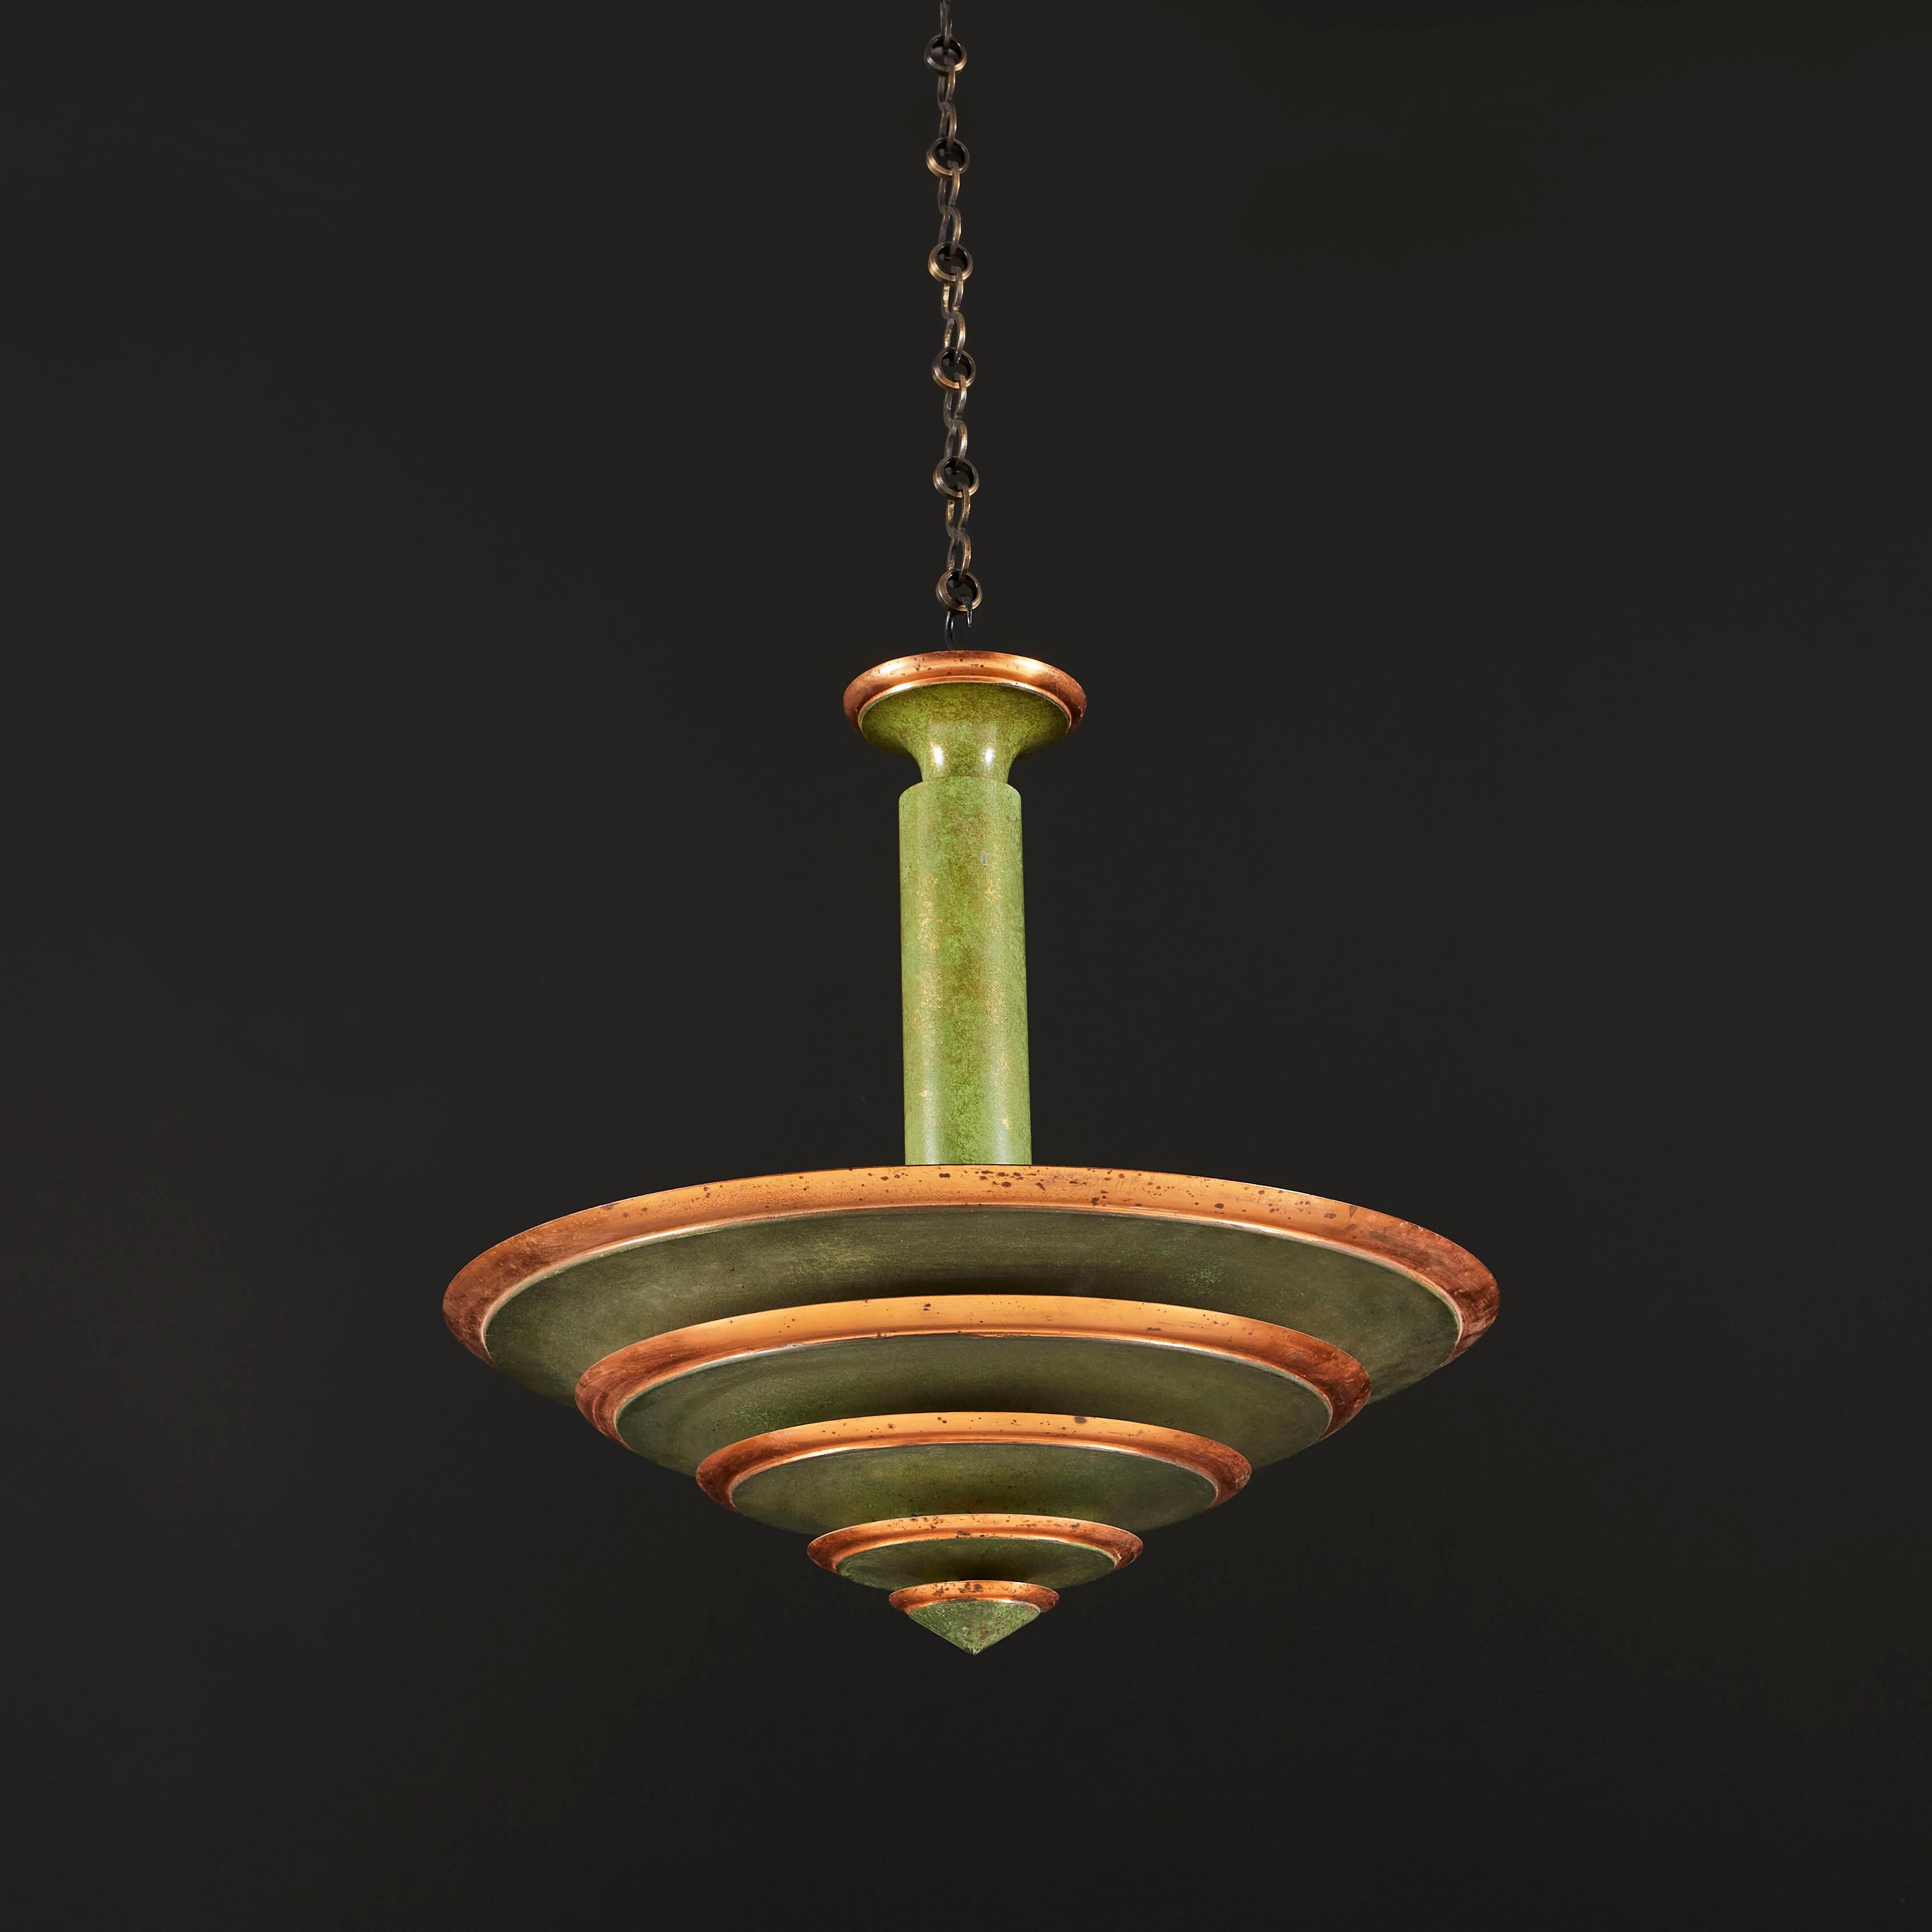 An unusual art deco copper hanging dish light, composed of four dishes stacked to form a conical shape, each layer with verdigris bands and copper contrasting rims.

Currently wired for the UK. Chain available upon request; please contact us for